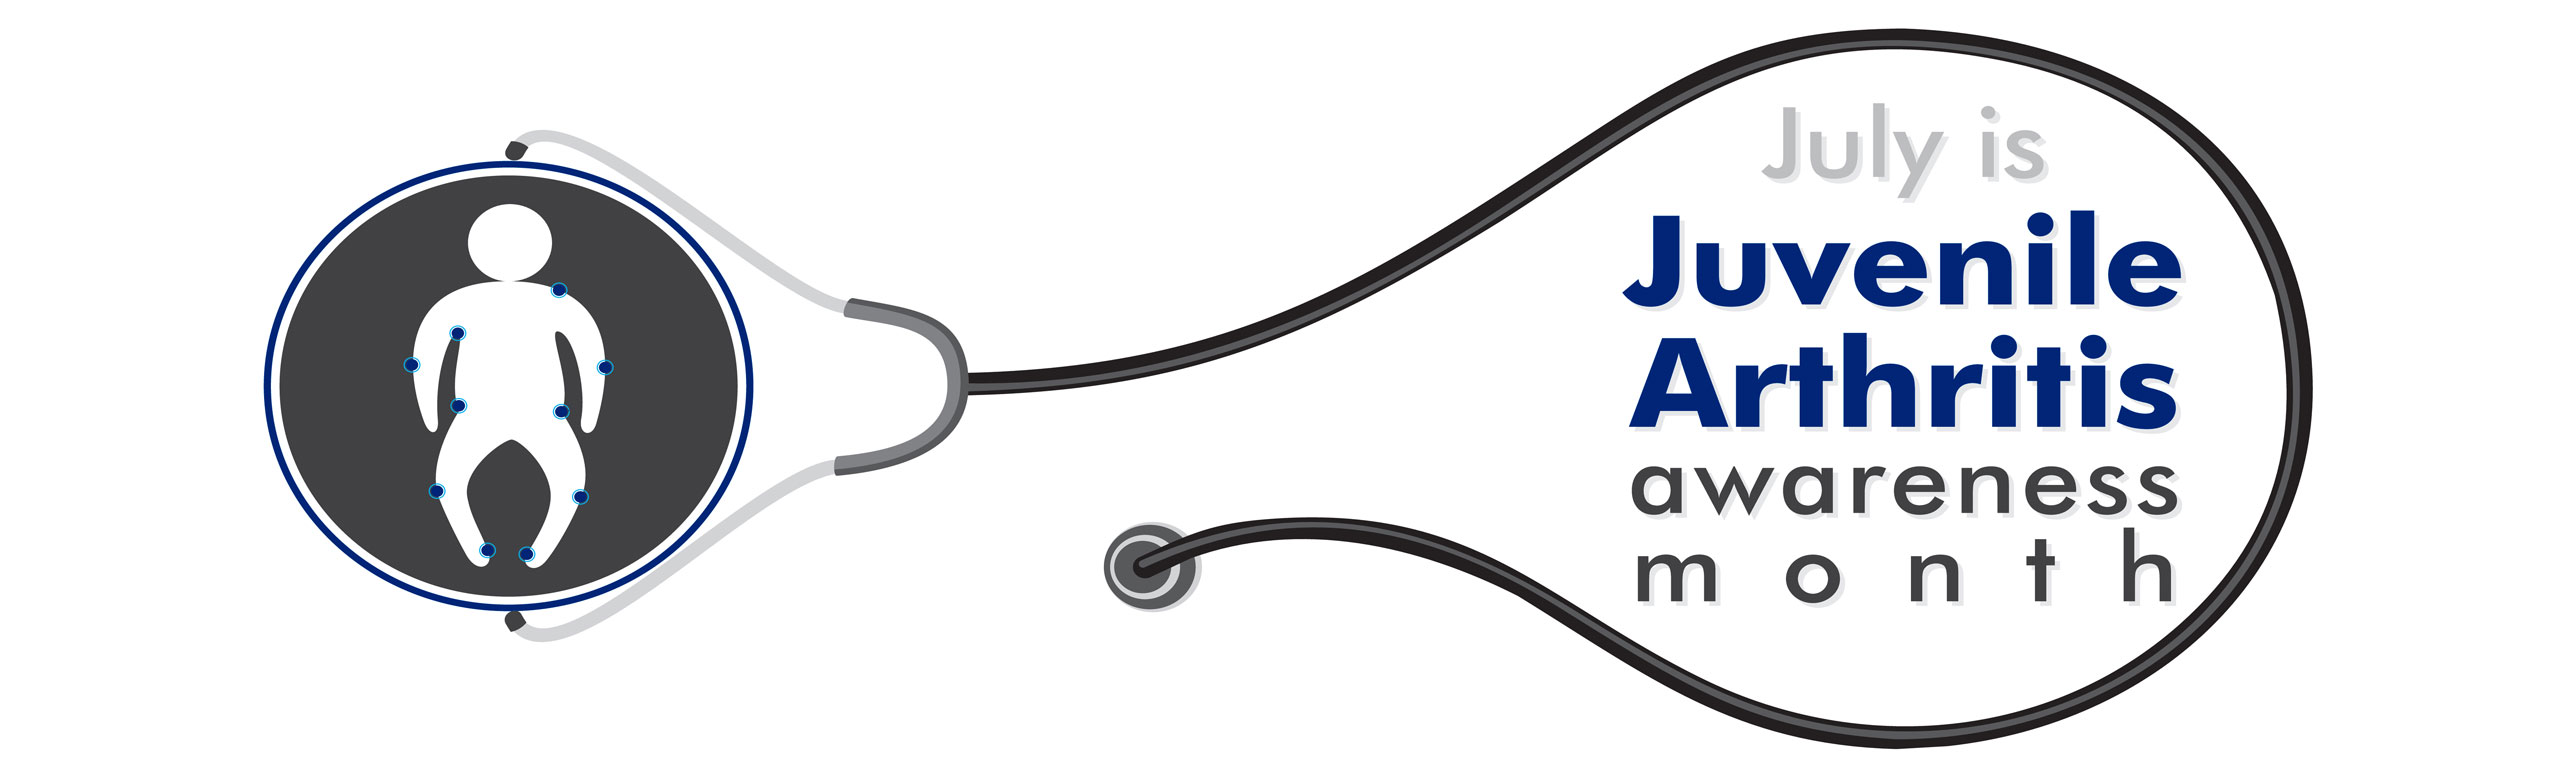 Banner picture of a stethoscope that is touching a circle with a juvenile stick figure with small dots around the body.
Banner says:
July is Juvenile Arthritis awareness month